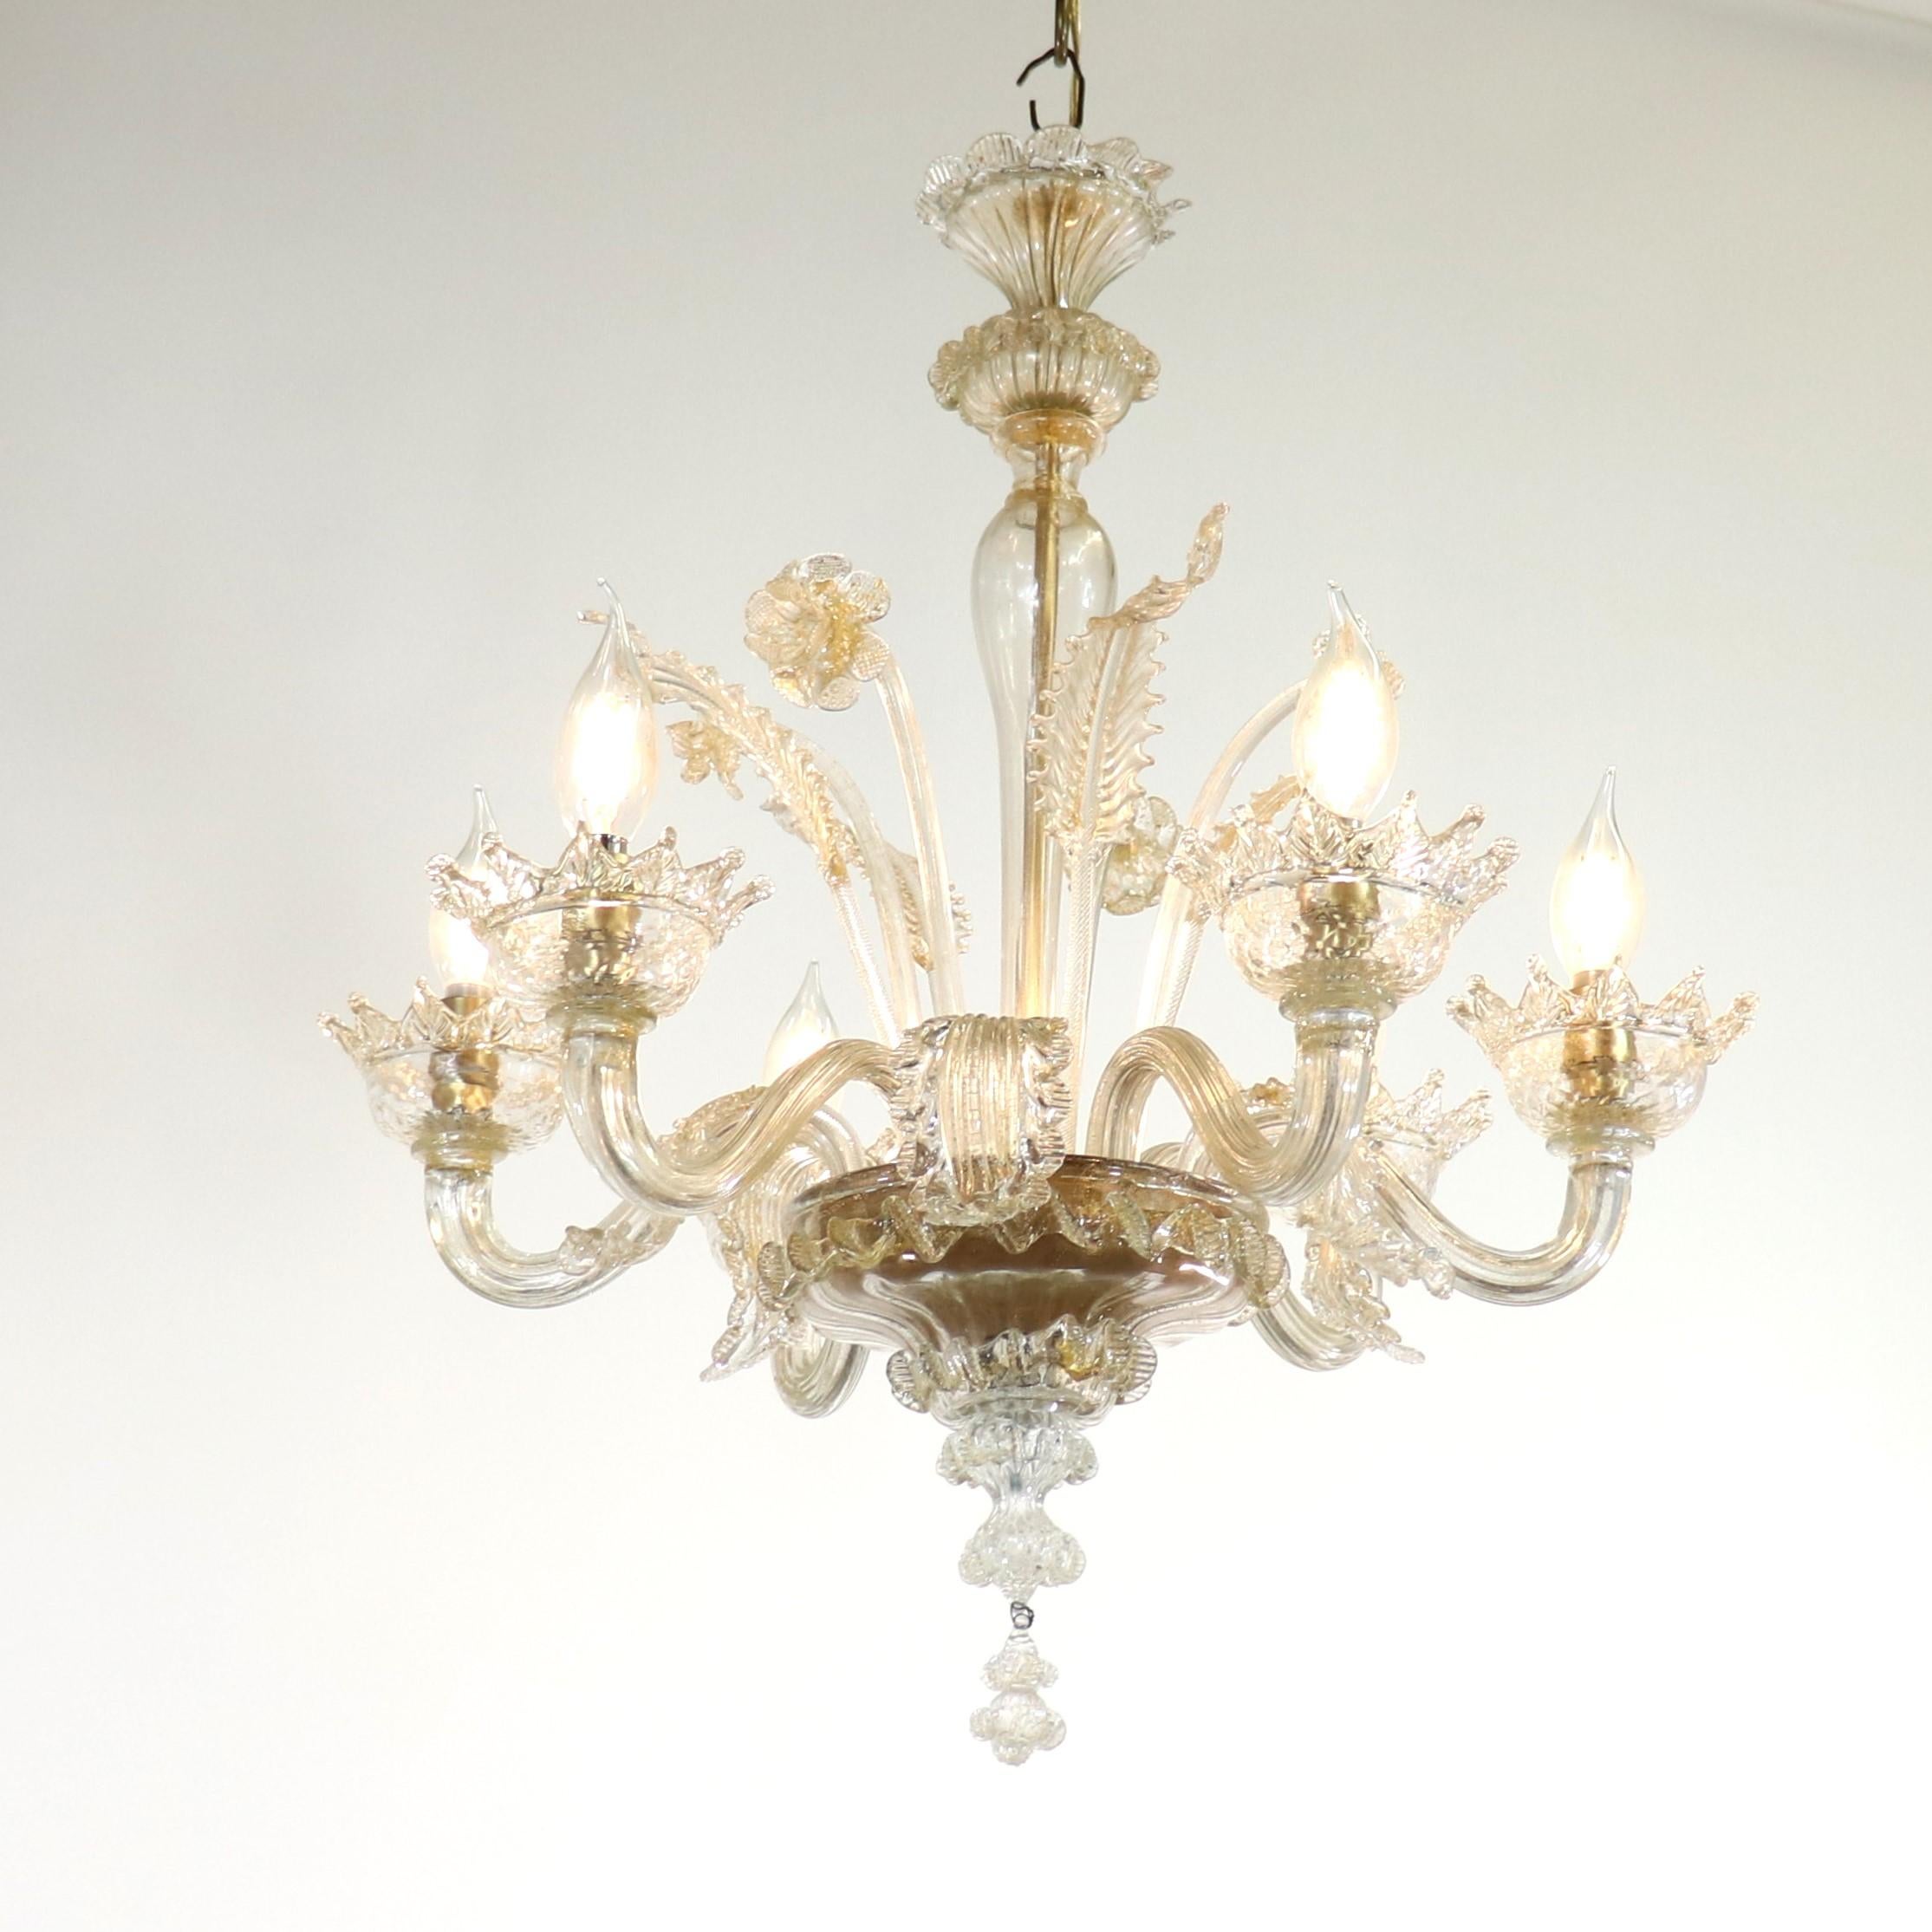 Hand-Crafted  Vintage Baroque Style Gold Infused Cristallo Murano Chandelier For Sale